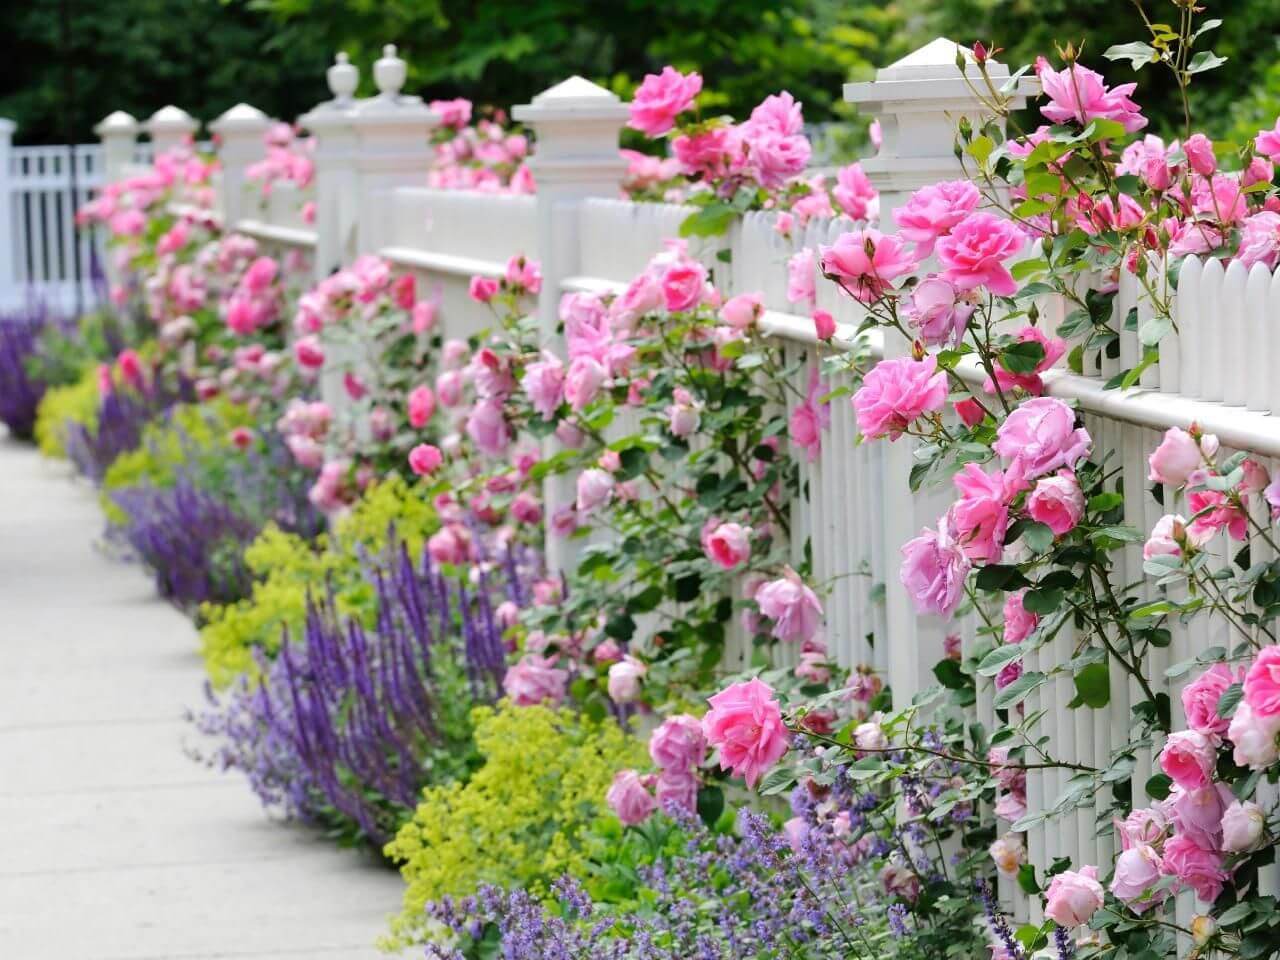 a lovely white picket fence with lush pink, purple and neon yellow blooms growing along the fence